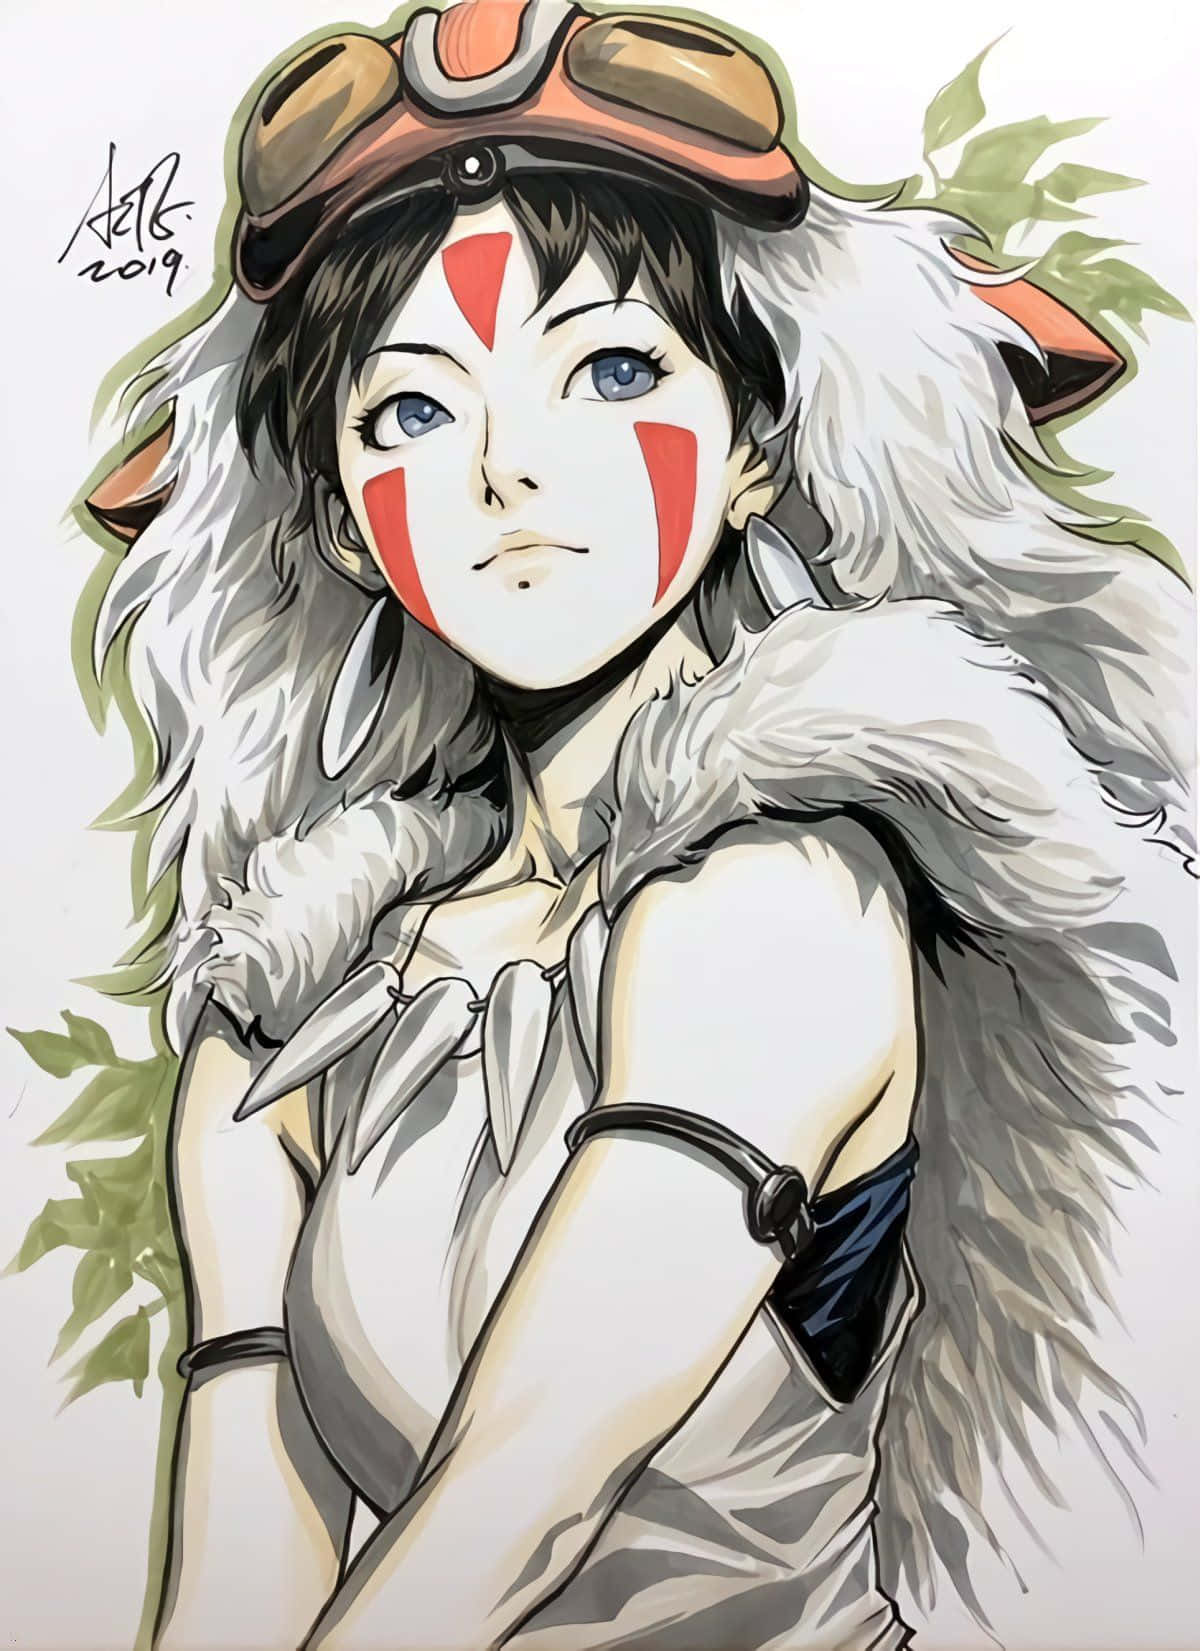 A young girl - Princess Mononoke - joins forces with the wolves of the forest